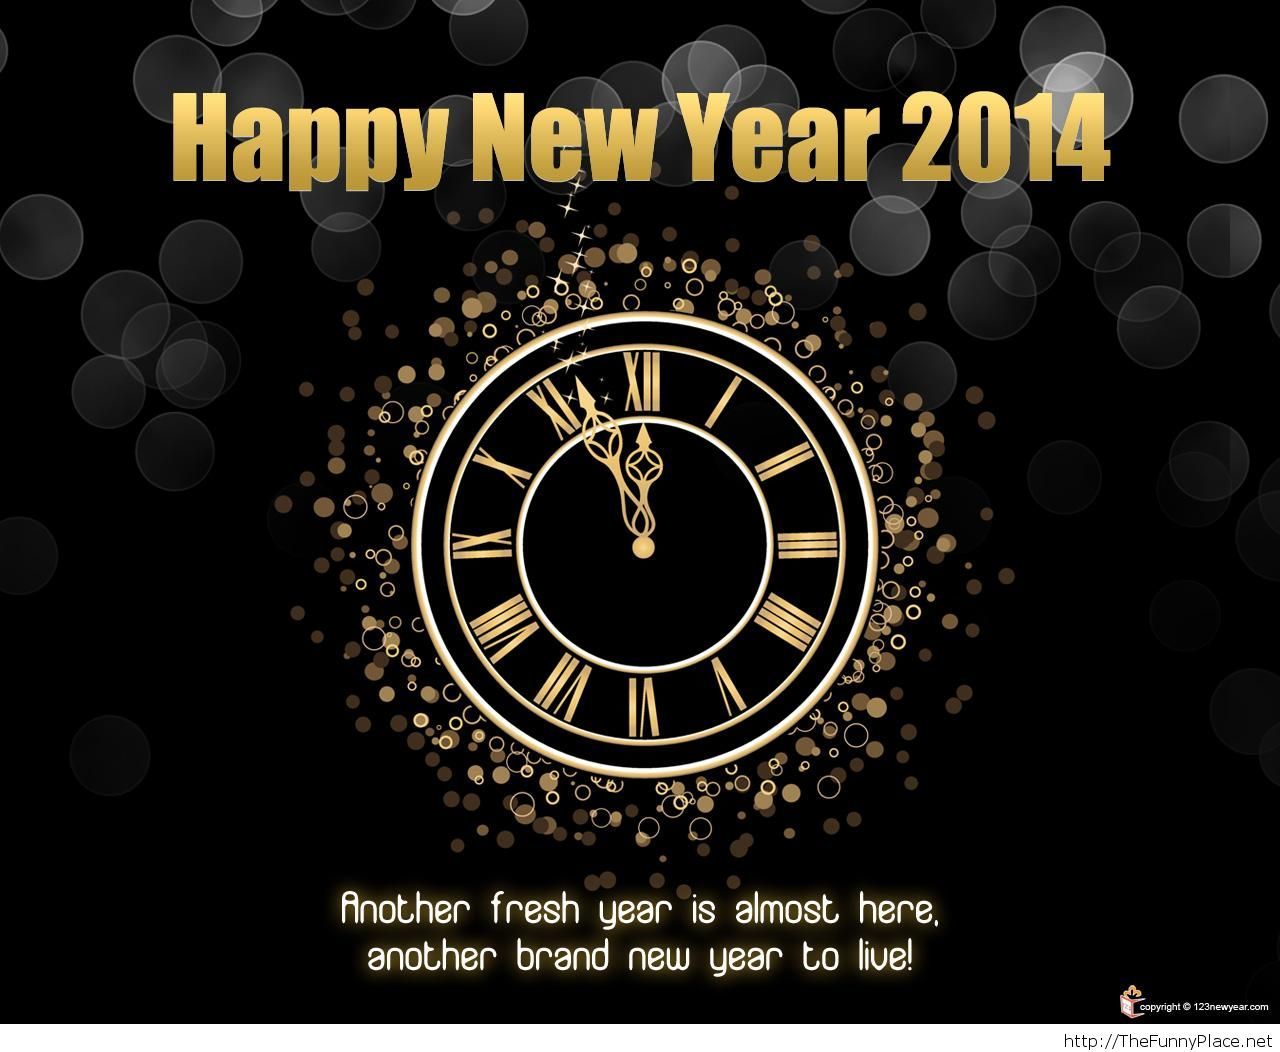 Happy New Year 2014 New Quote - Wishes Happy New Year 2019 - HD Wallpaper 